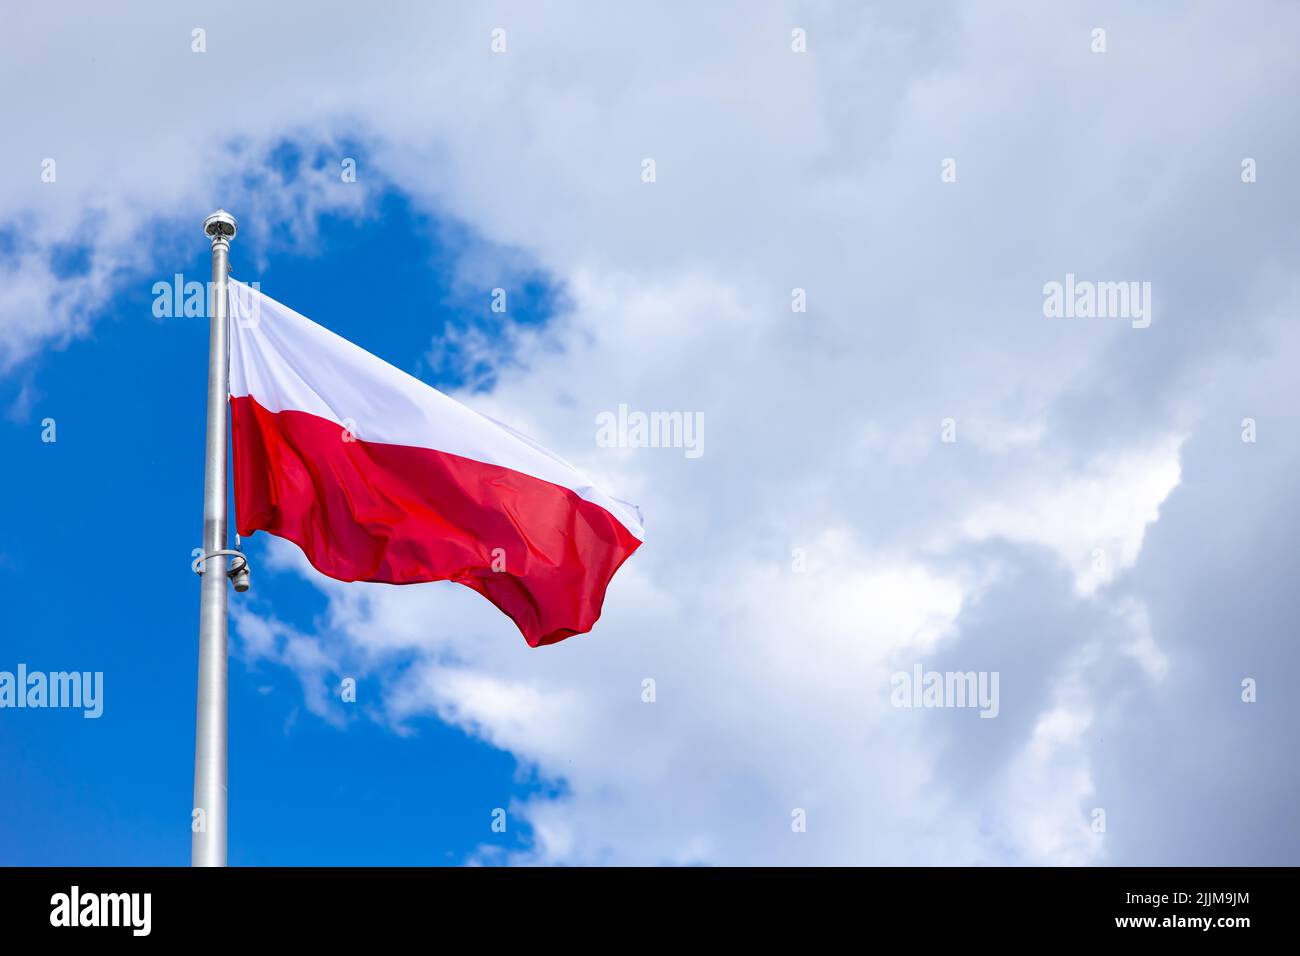 National banner of Poland wave in the background of blue sky with little small clouds. Picture taken in midlle of the day. Stock Photo